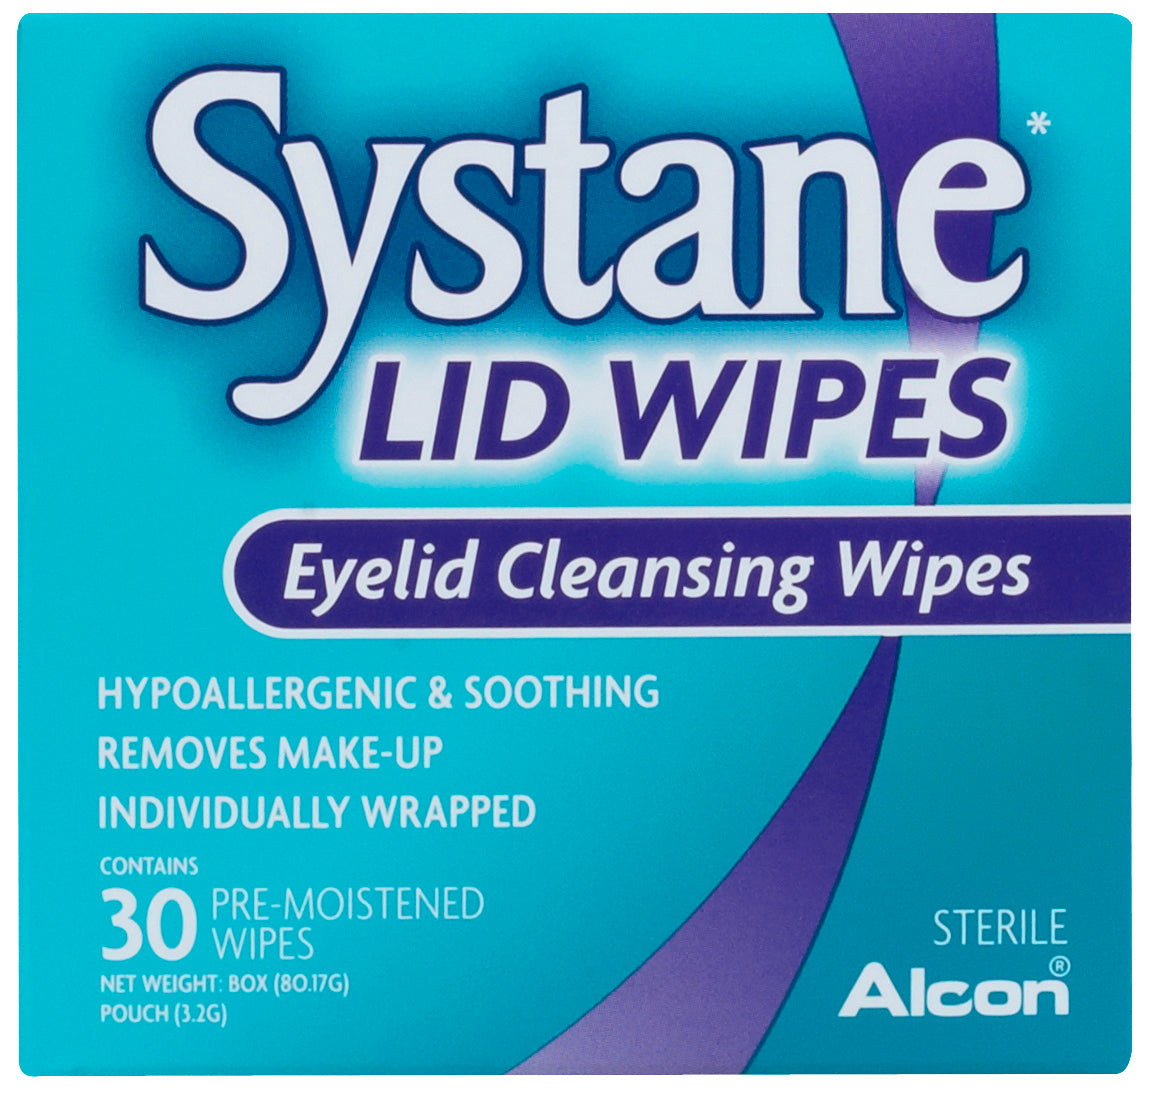 Systane Lid Wipes Pre-Moistened Wipes 30